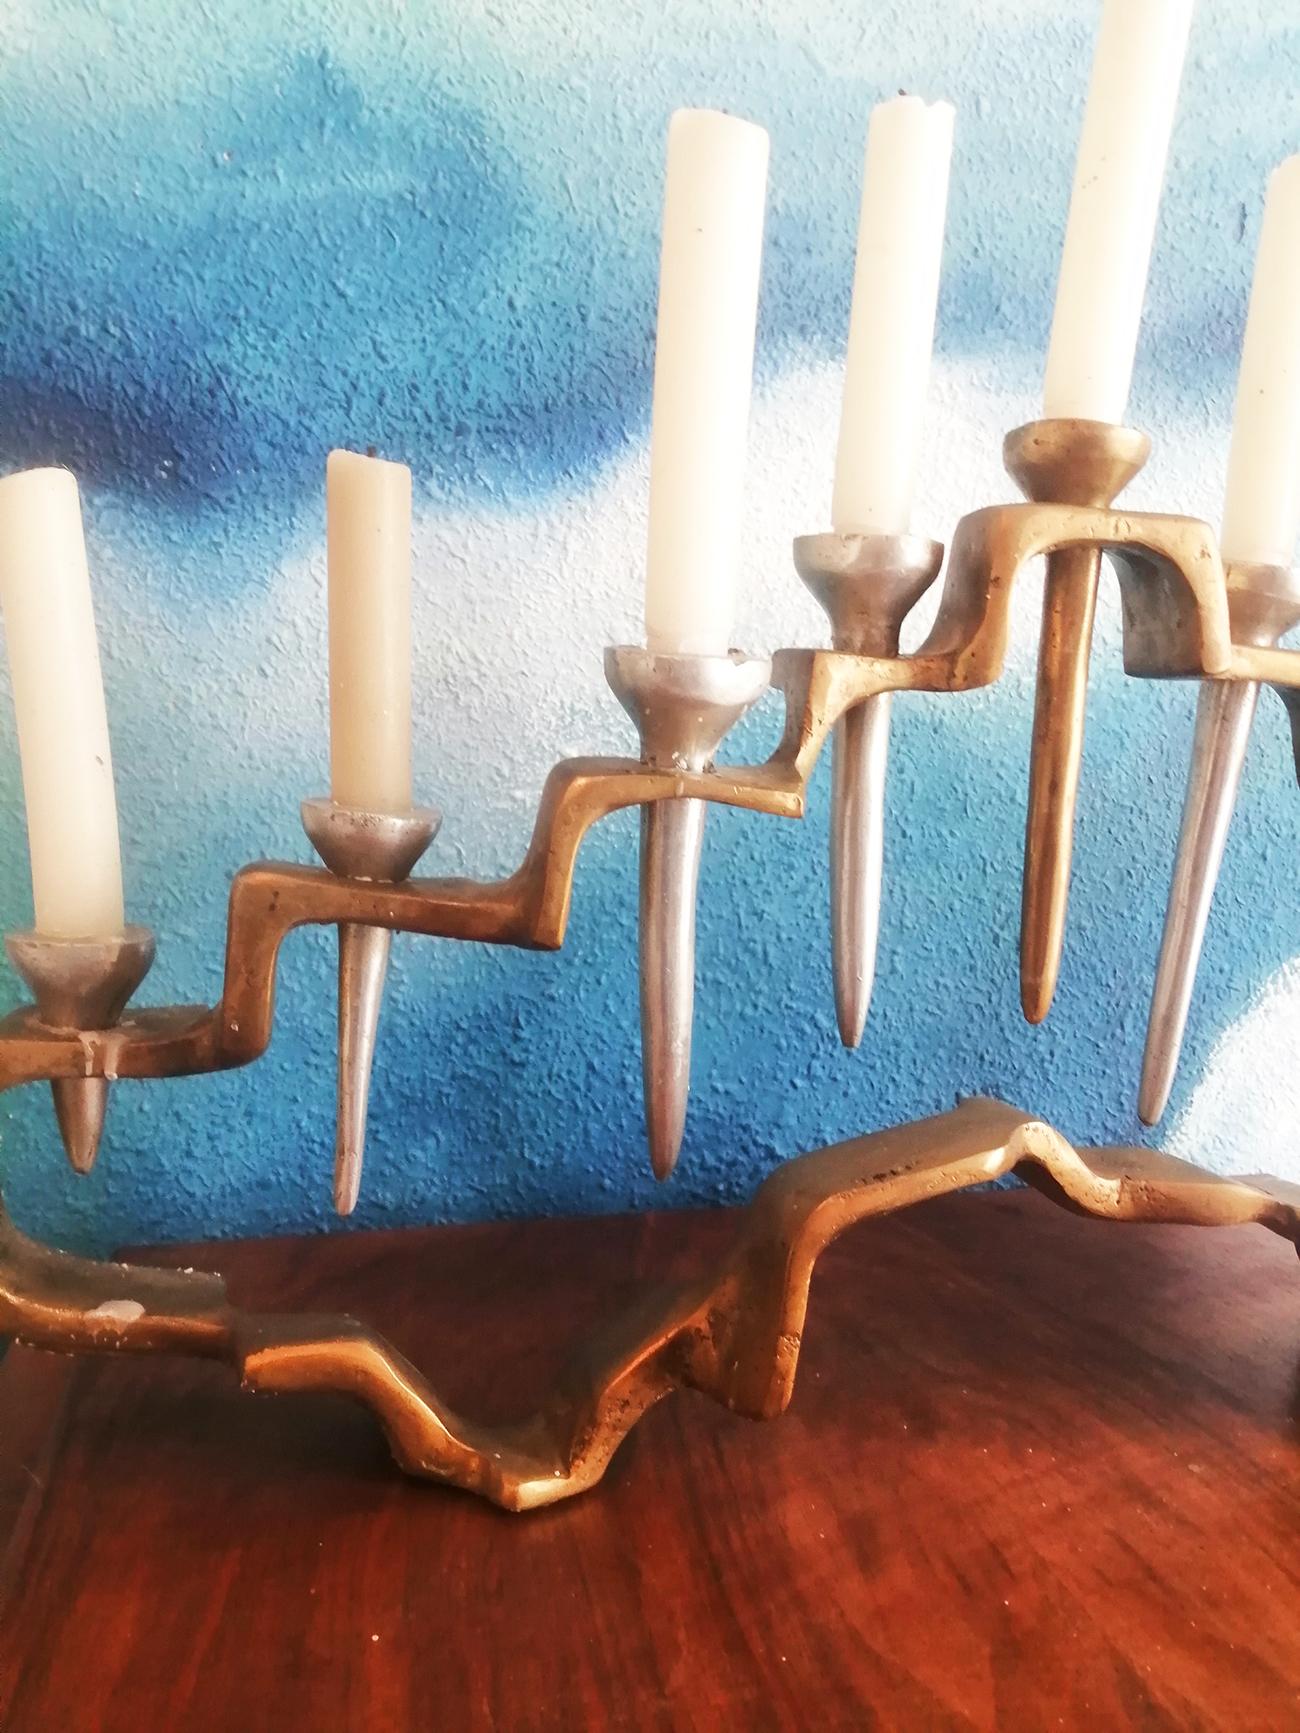 Spectacular bronze sculpture Candle holder  from David Marshall 

Perfect  Candle holder to put in the center of a large table, either in a contemporary or traditional decoration
It is also perfect to place on a console or sideboard

Perfectly